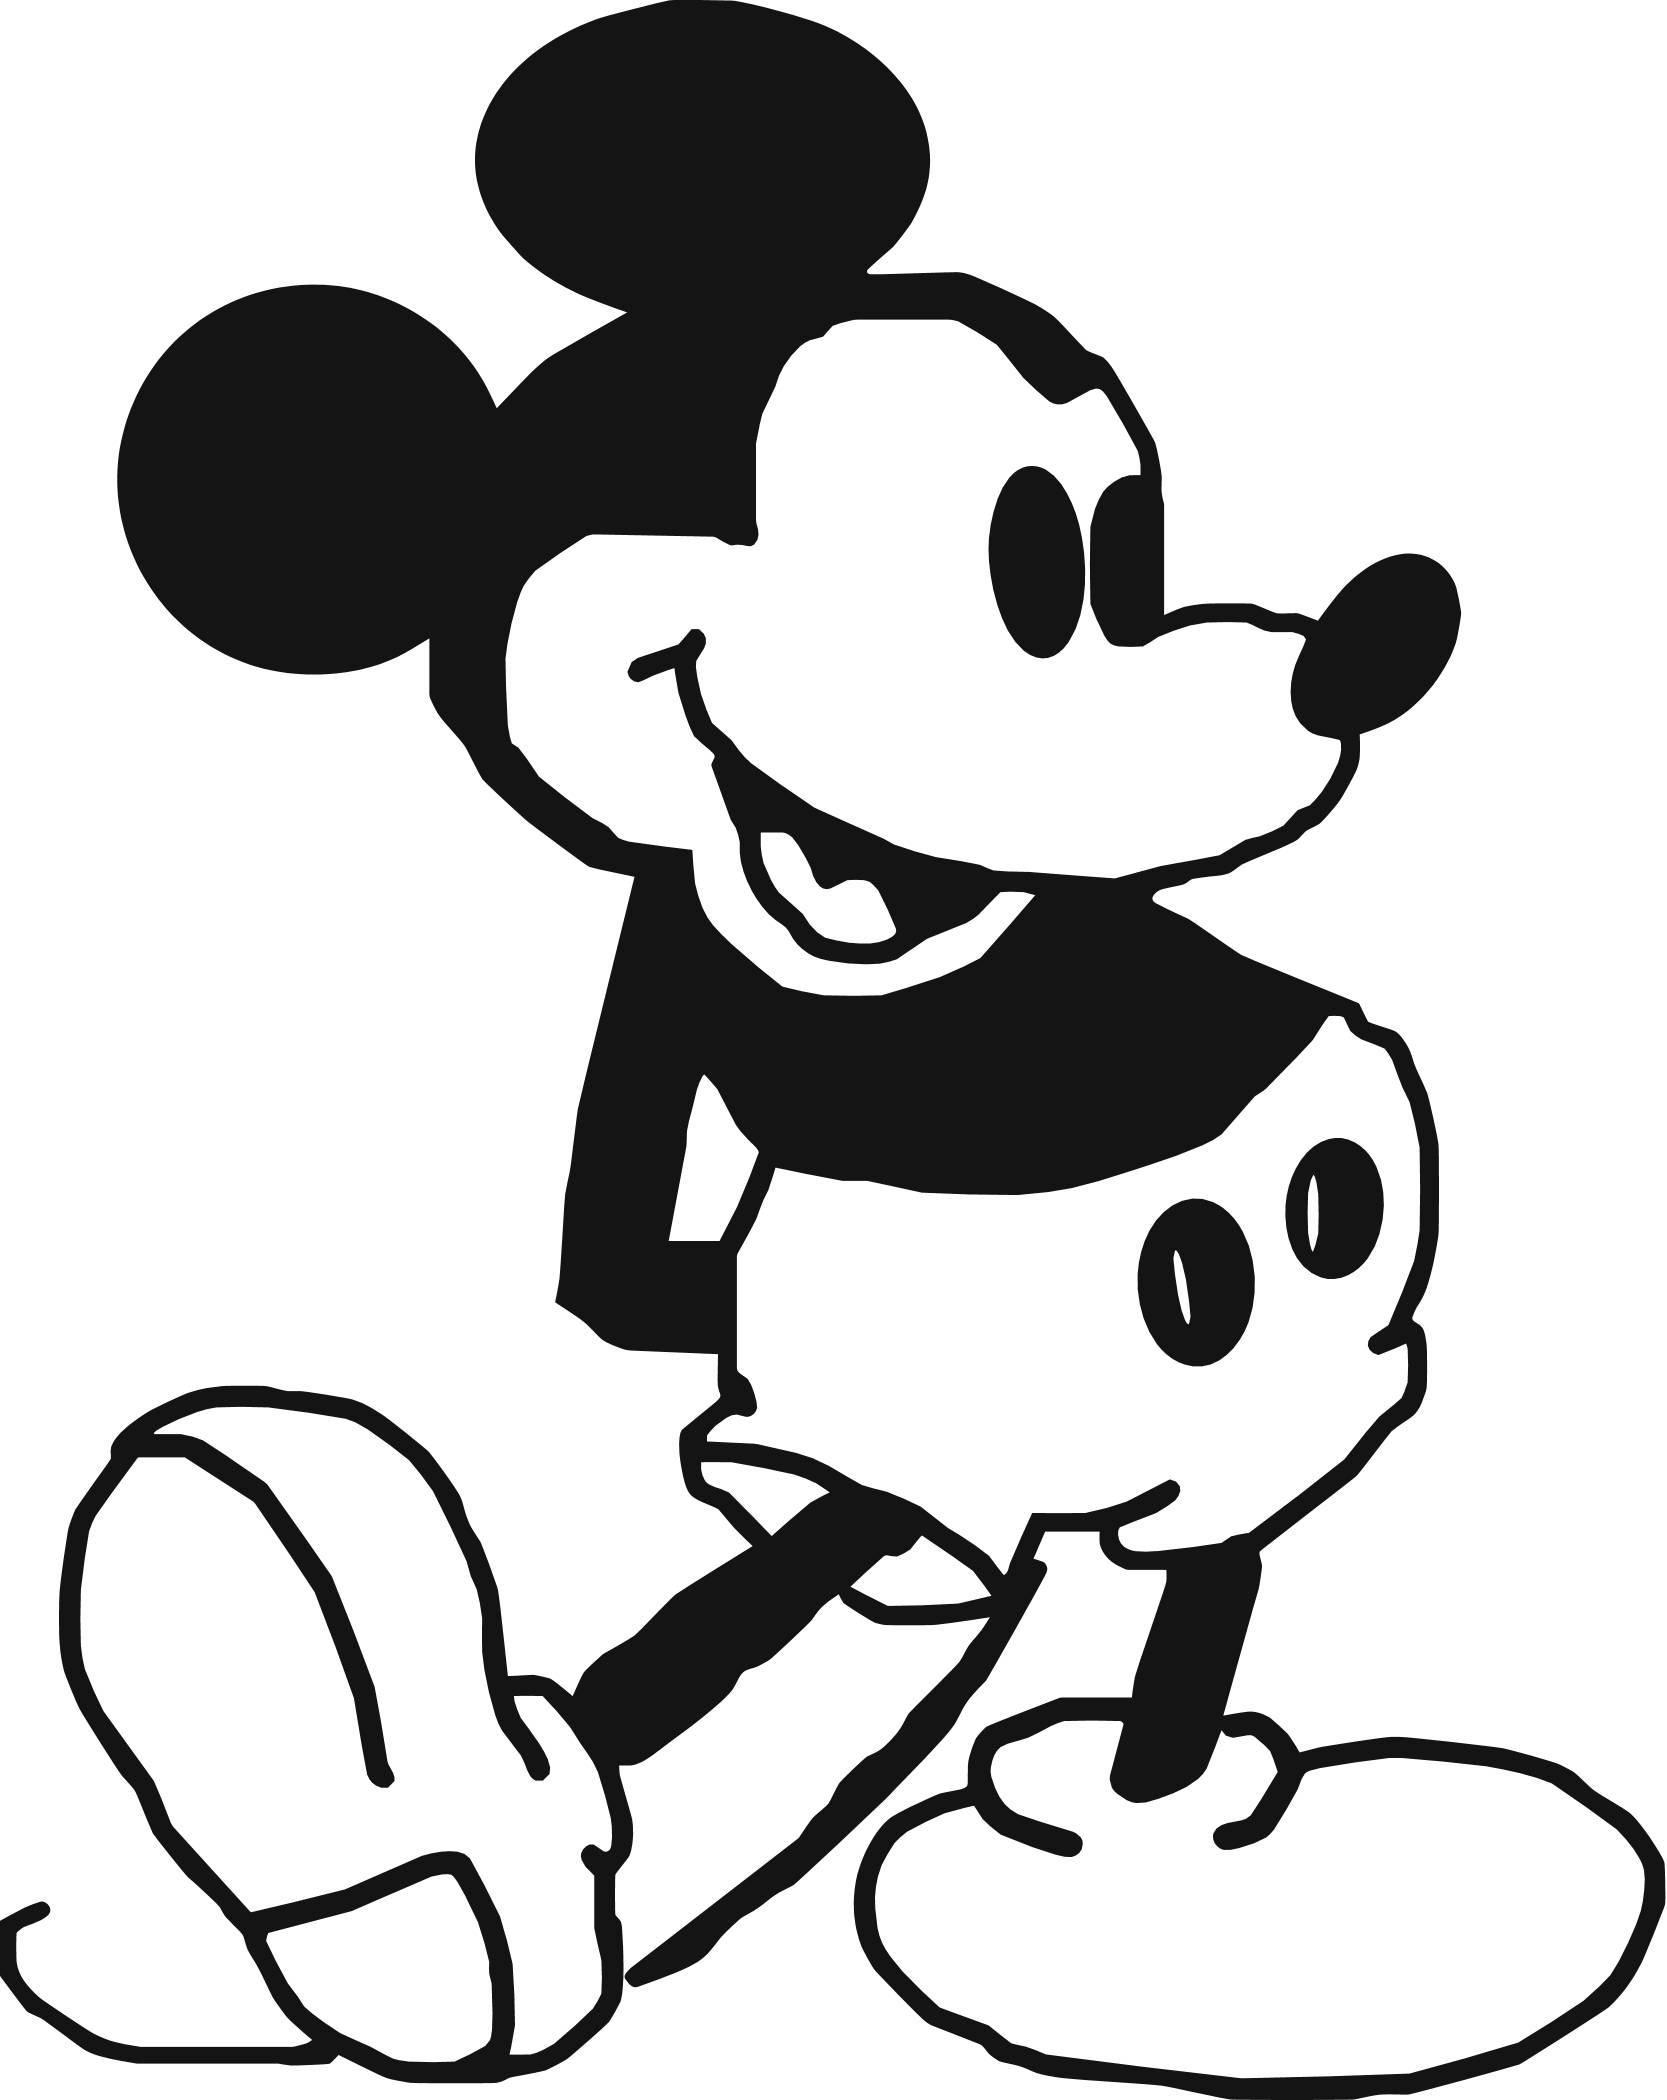 Old Mickey Mouse Cartoons In Black And White